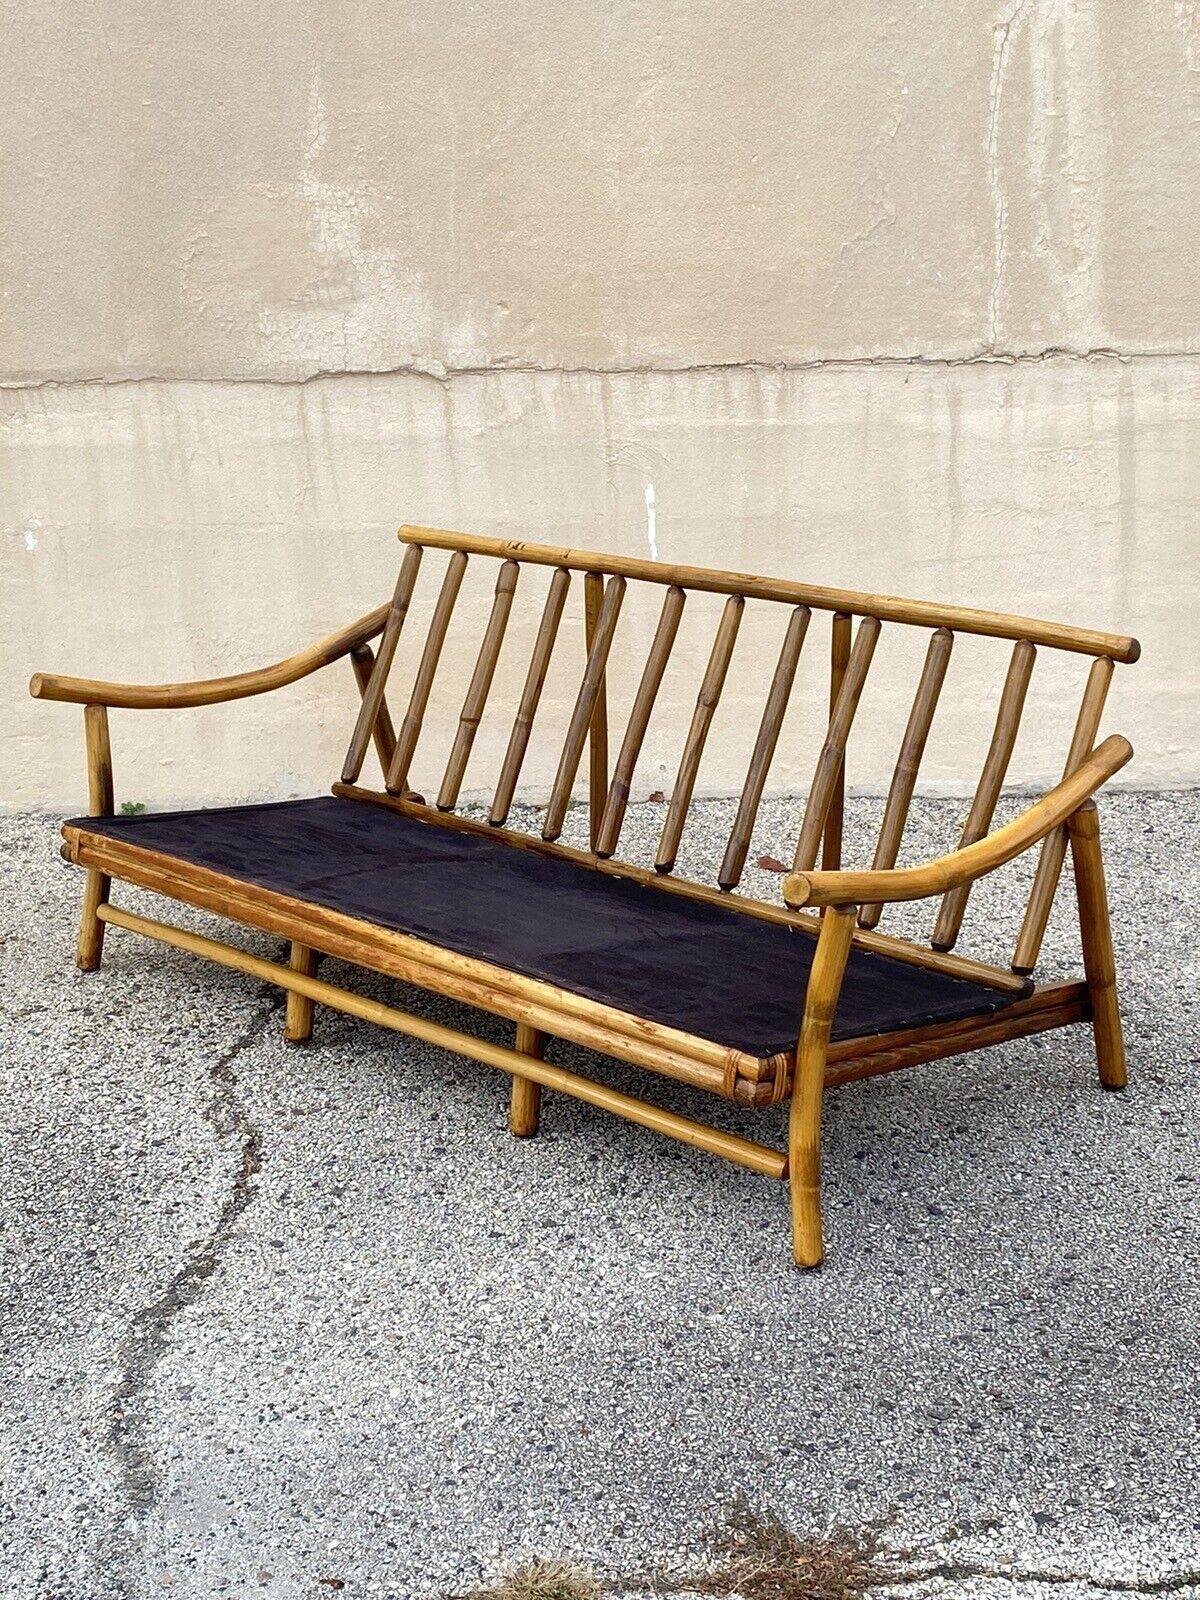 Vintage Ficks Reed Bamboo Rattan Tiki Sofa Set with Lounge Chairs - 3 Pc Set For Sale 5